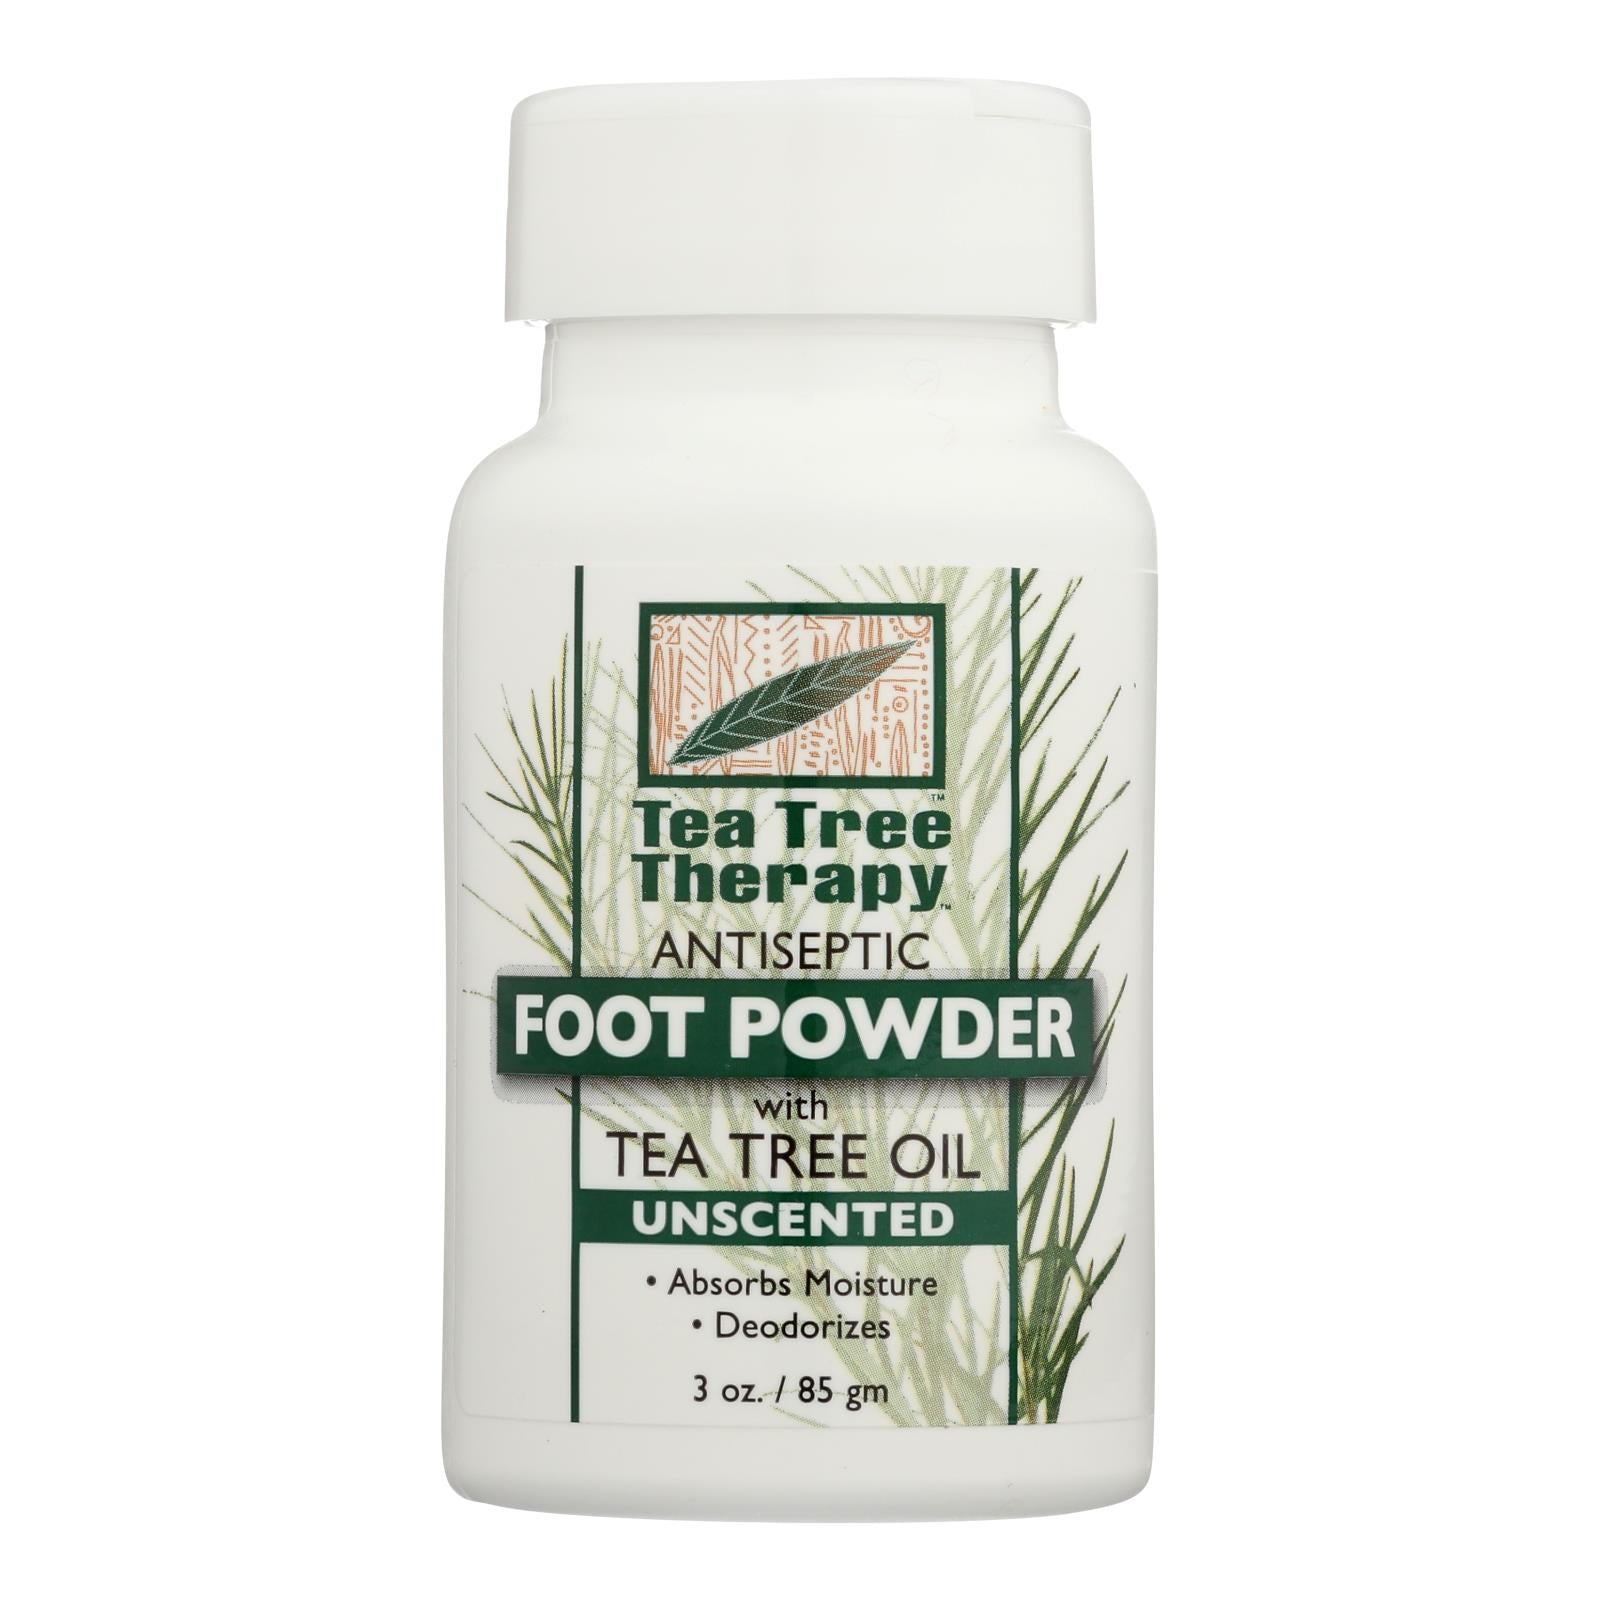 Tea Tree Therapy - Foot Powder Unscented - 1 Each - 3 OZ